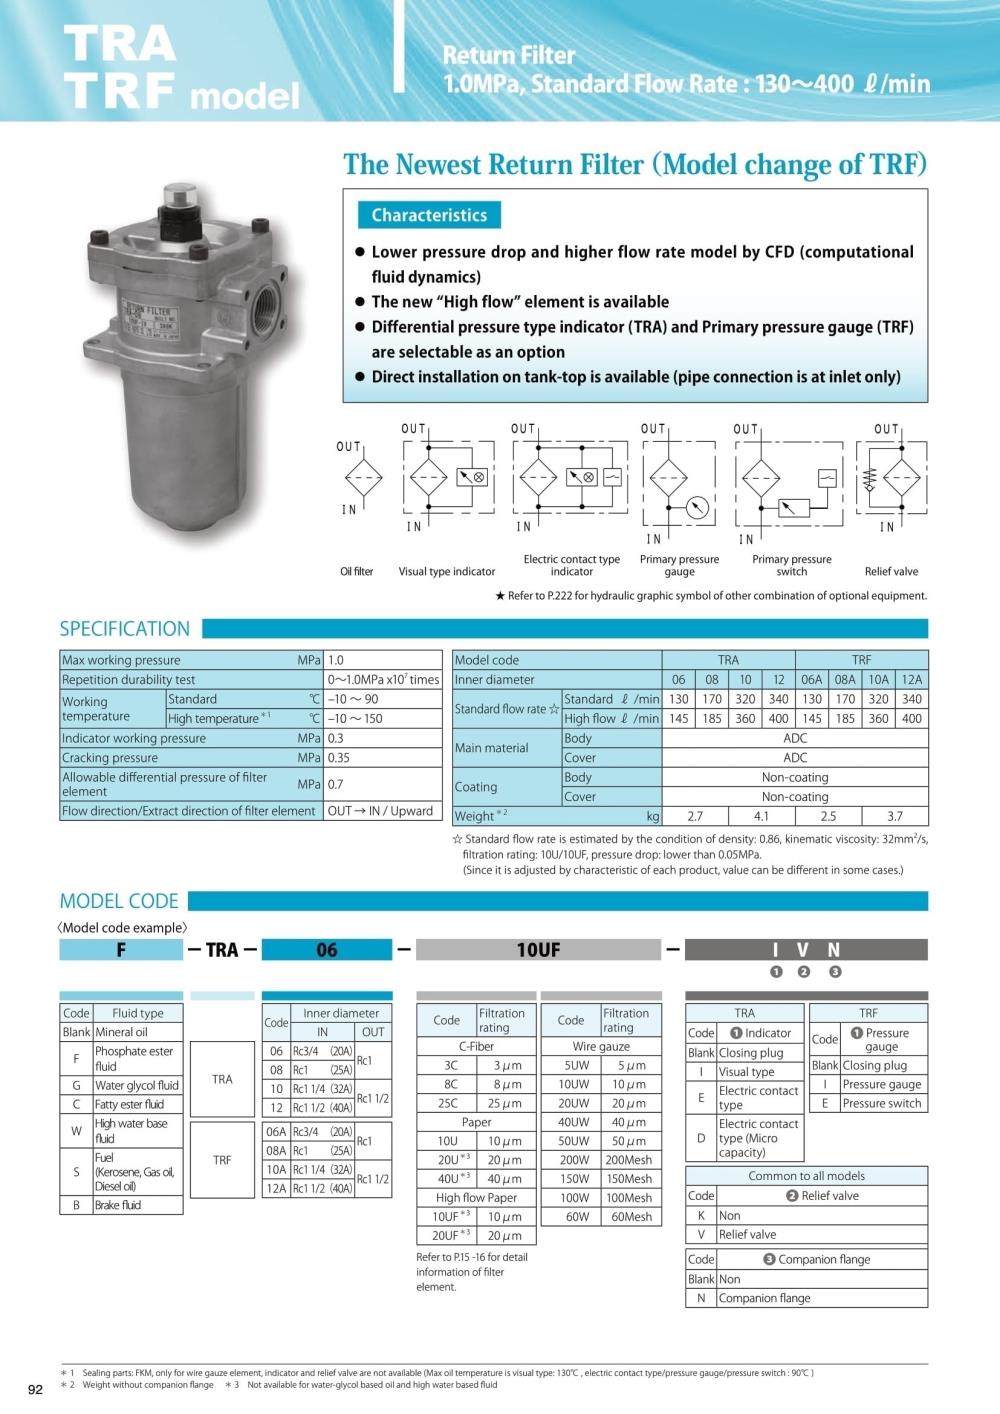 TAISEI Oil Filter TRA-10-3C-IVN Series,TRA-10-3C-IVN, TRA-10-8C-IVN, TRA-10-25C-IVN, TRA-10-10U-IVN, TRA-10-20U-IVN, TRA-10-40U-IVN, TRA-10-10UF-IVN, TRA-10-20UF-IVN, TRA-10-5UW-IVN, TRA-10-10UW-IVN, TRA-10-20UW-IVN, TRA-10-40UW-IVN, TRA-10-50UW-IVN, TRA-10-200W-IVN, TRA-10-150W-IVN, TRA-10-100W-IVN, TRA-10-60W-IVN, TAISEI, Oil Filter, Return Filter,TAISEI,Machinery and Process Equipment/Filters/Gas & Oil